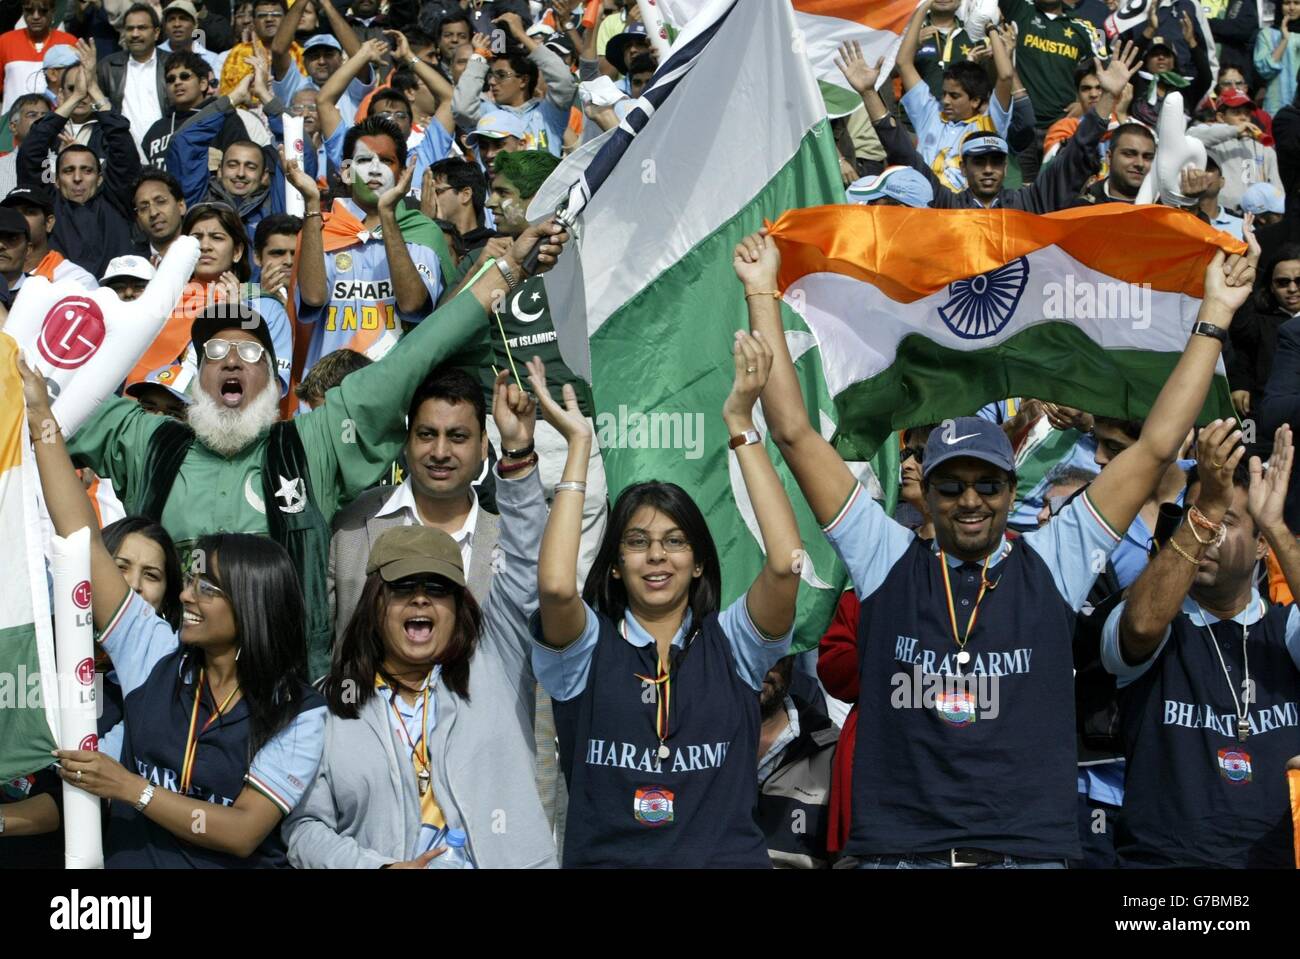 Pakistan fan, Cha Cha (Uncle) Cricket (centre, left), celebrates amongst Indian cricket fans during the I.C.C Champions Trophy match between Pakistan and India at Edgbaston, Birmingham. Stock Photo